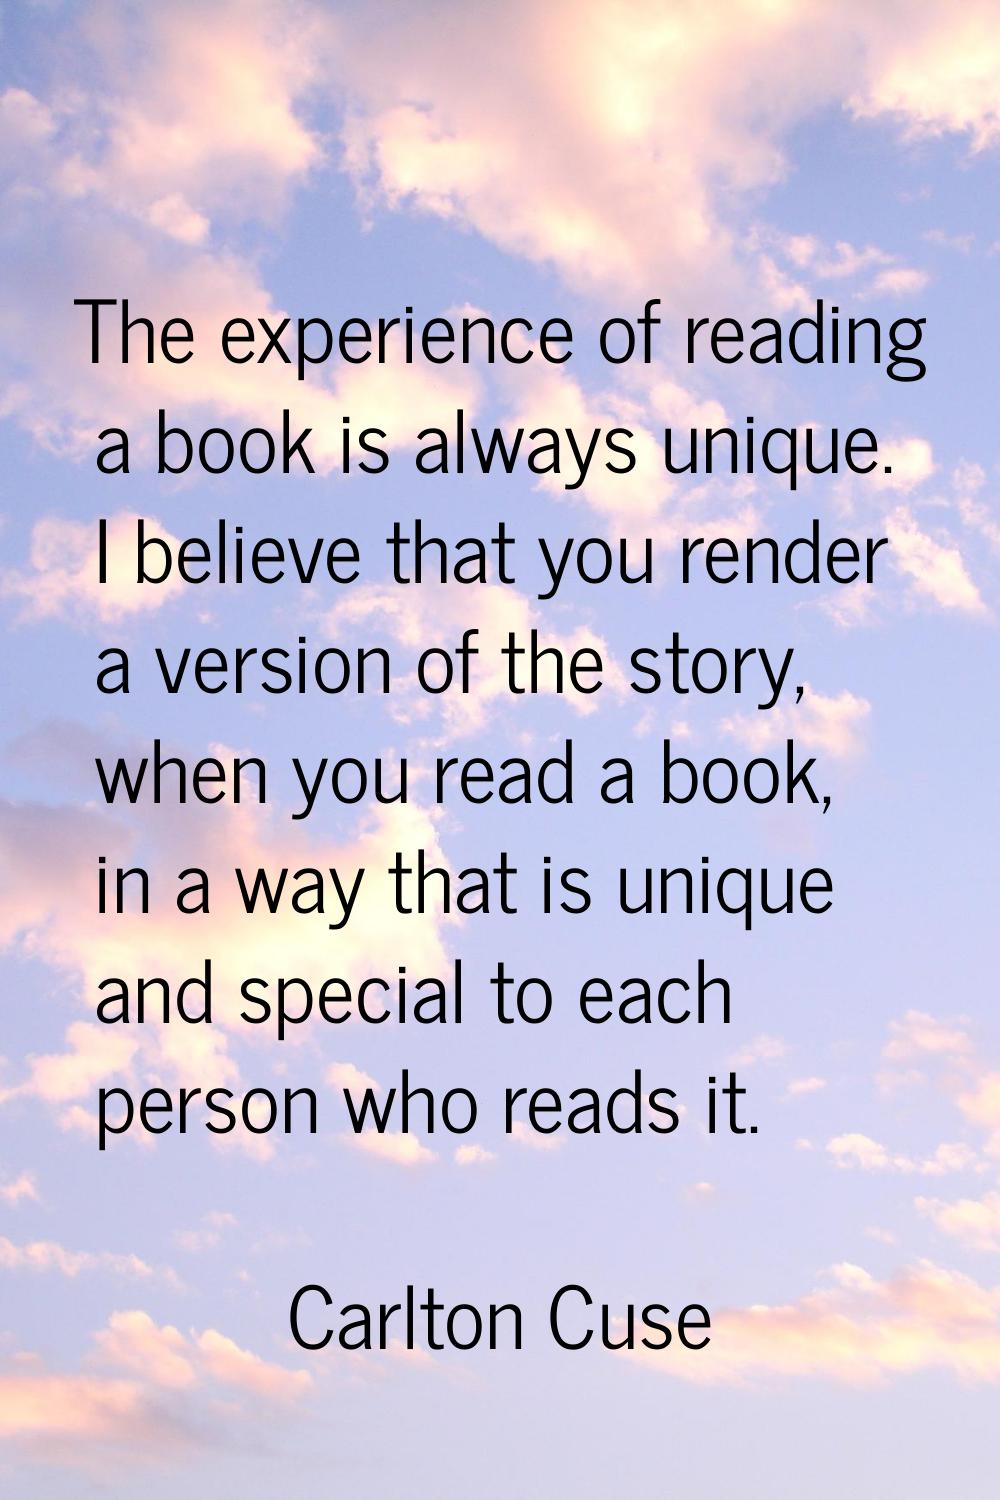 The experience of reading a book is always unique. I believe that you render a version of the story